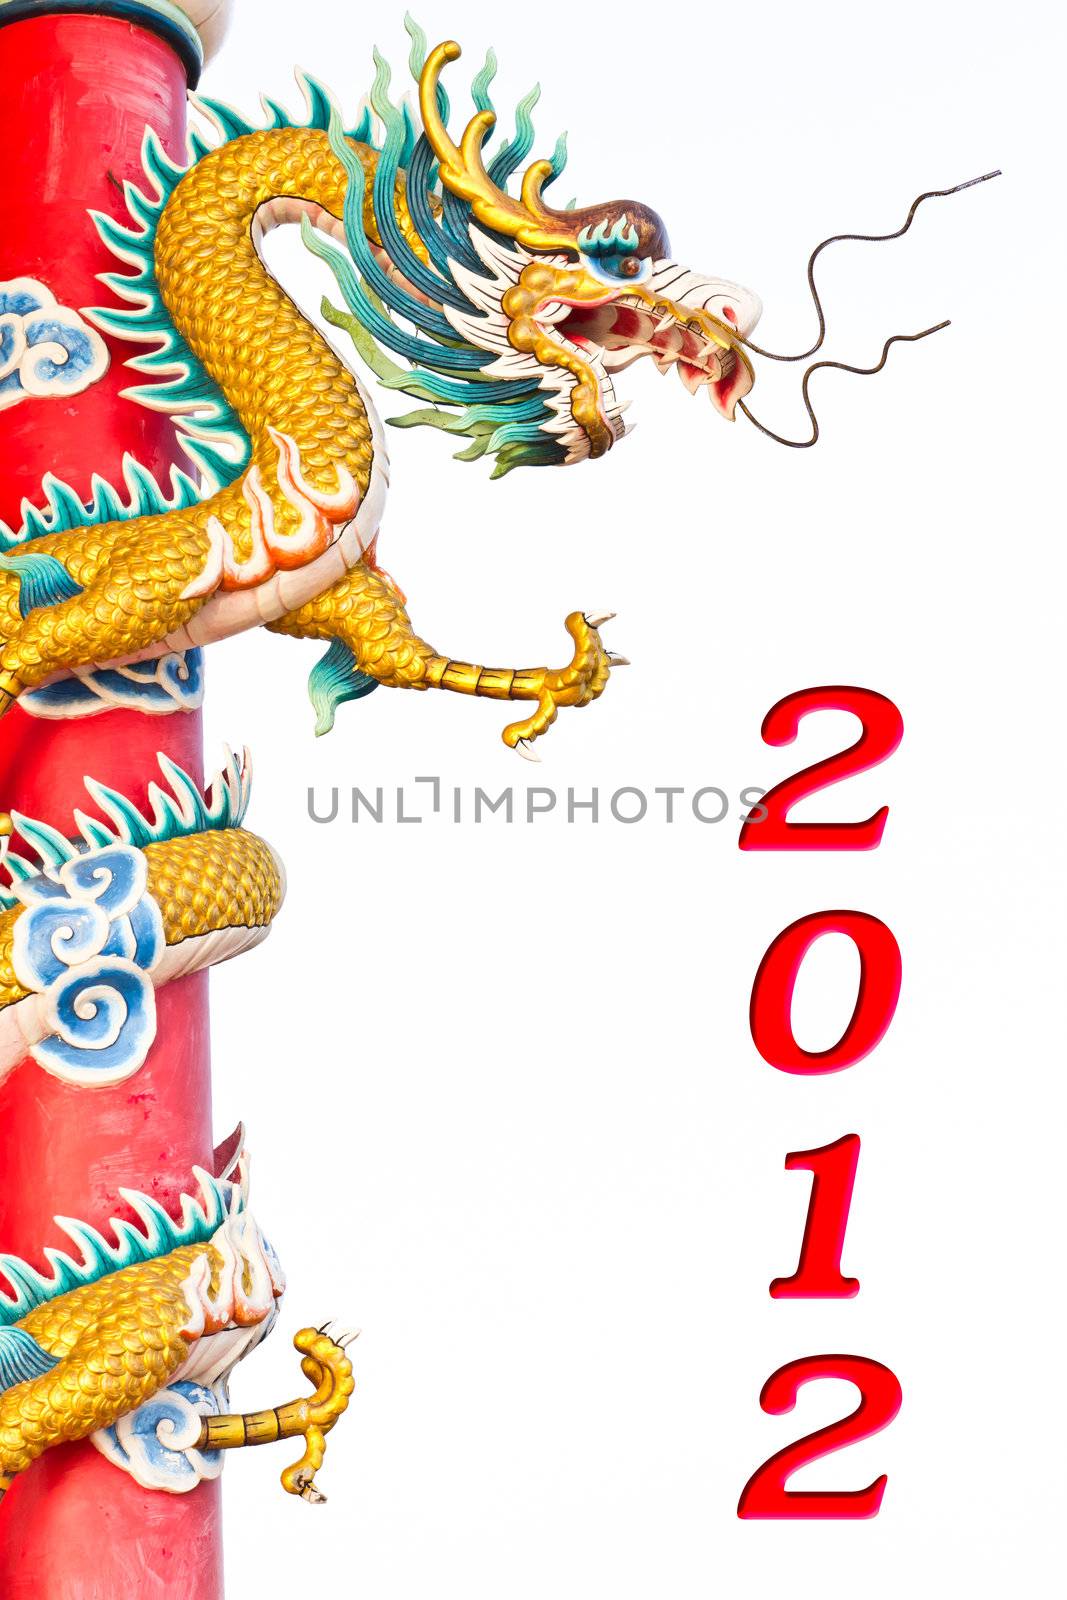 dragon statue and happy new year 2012